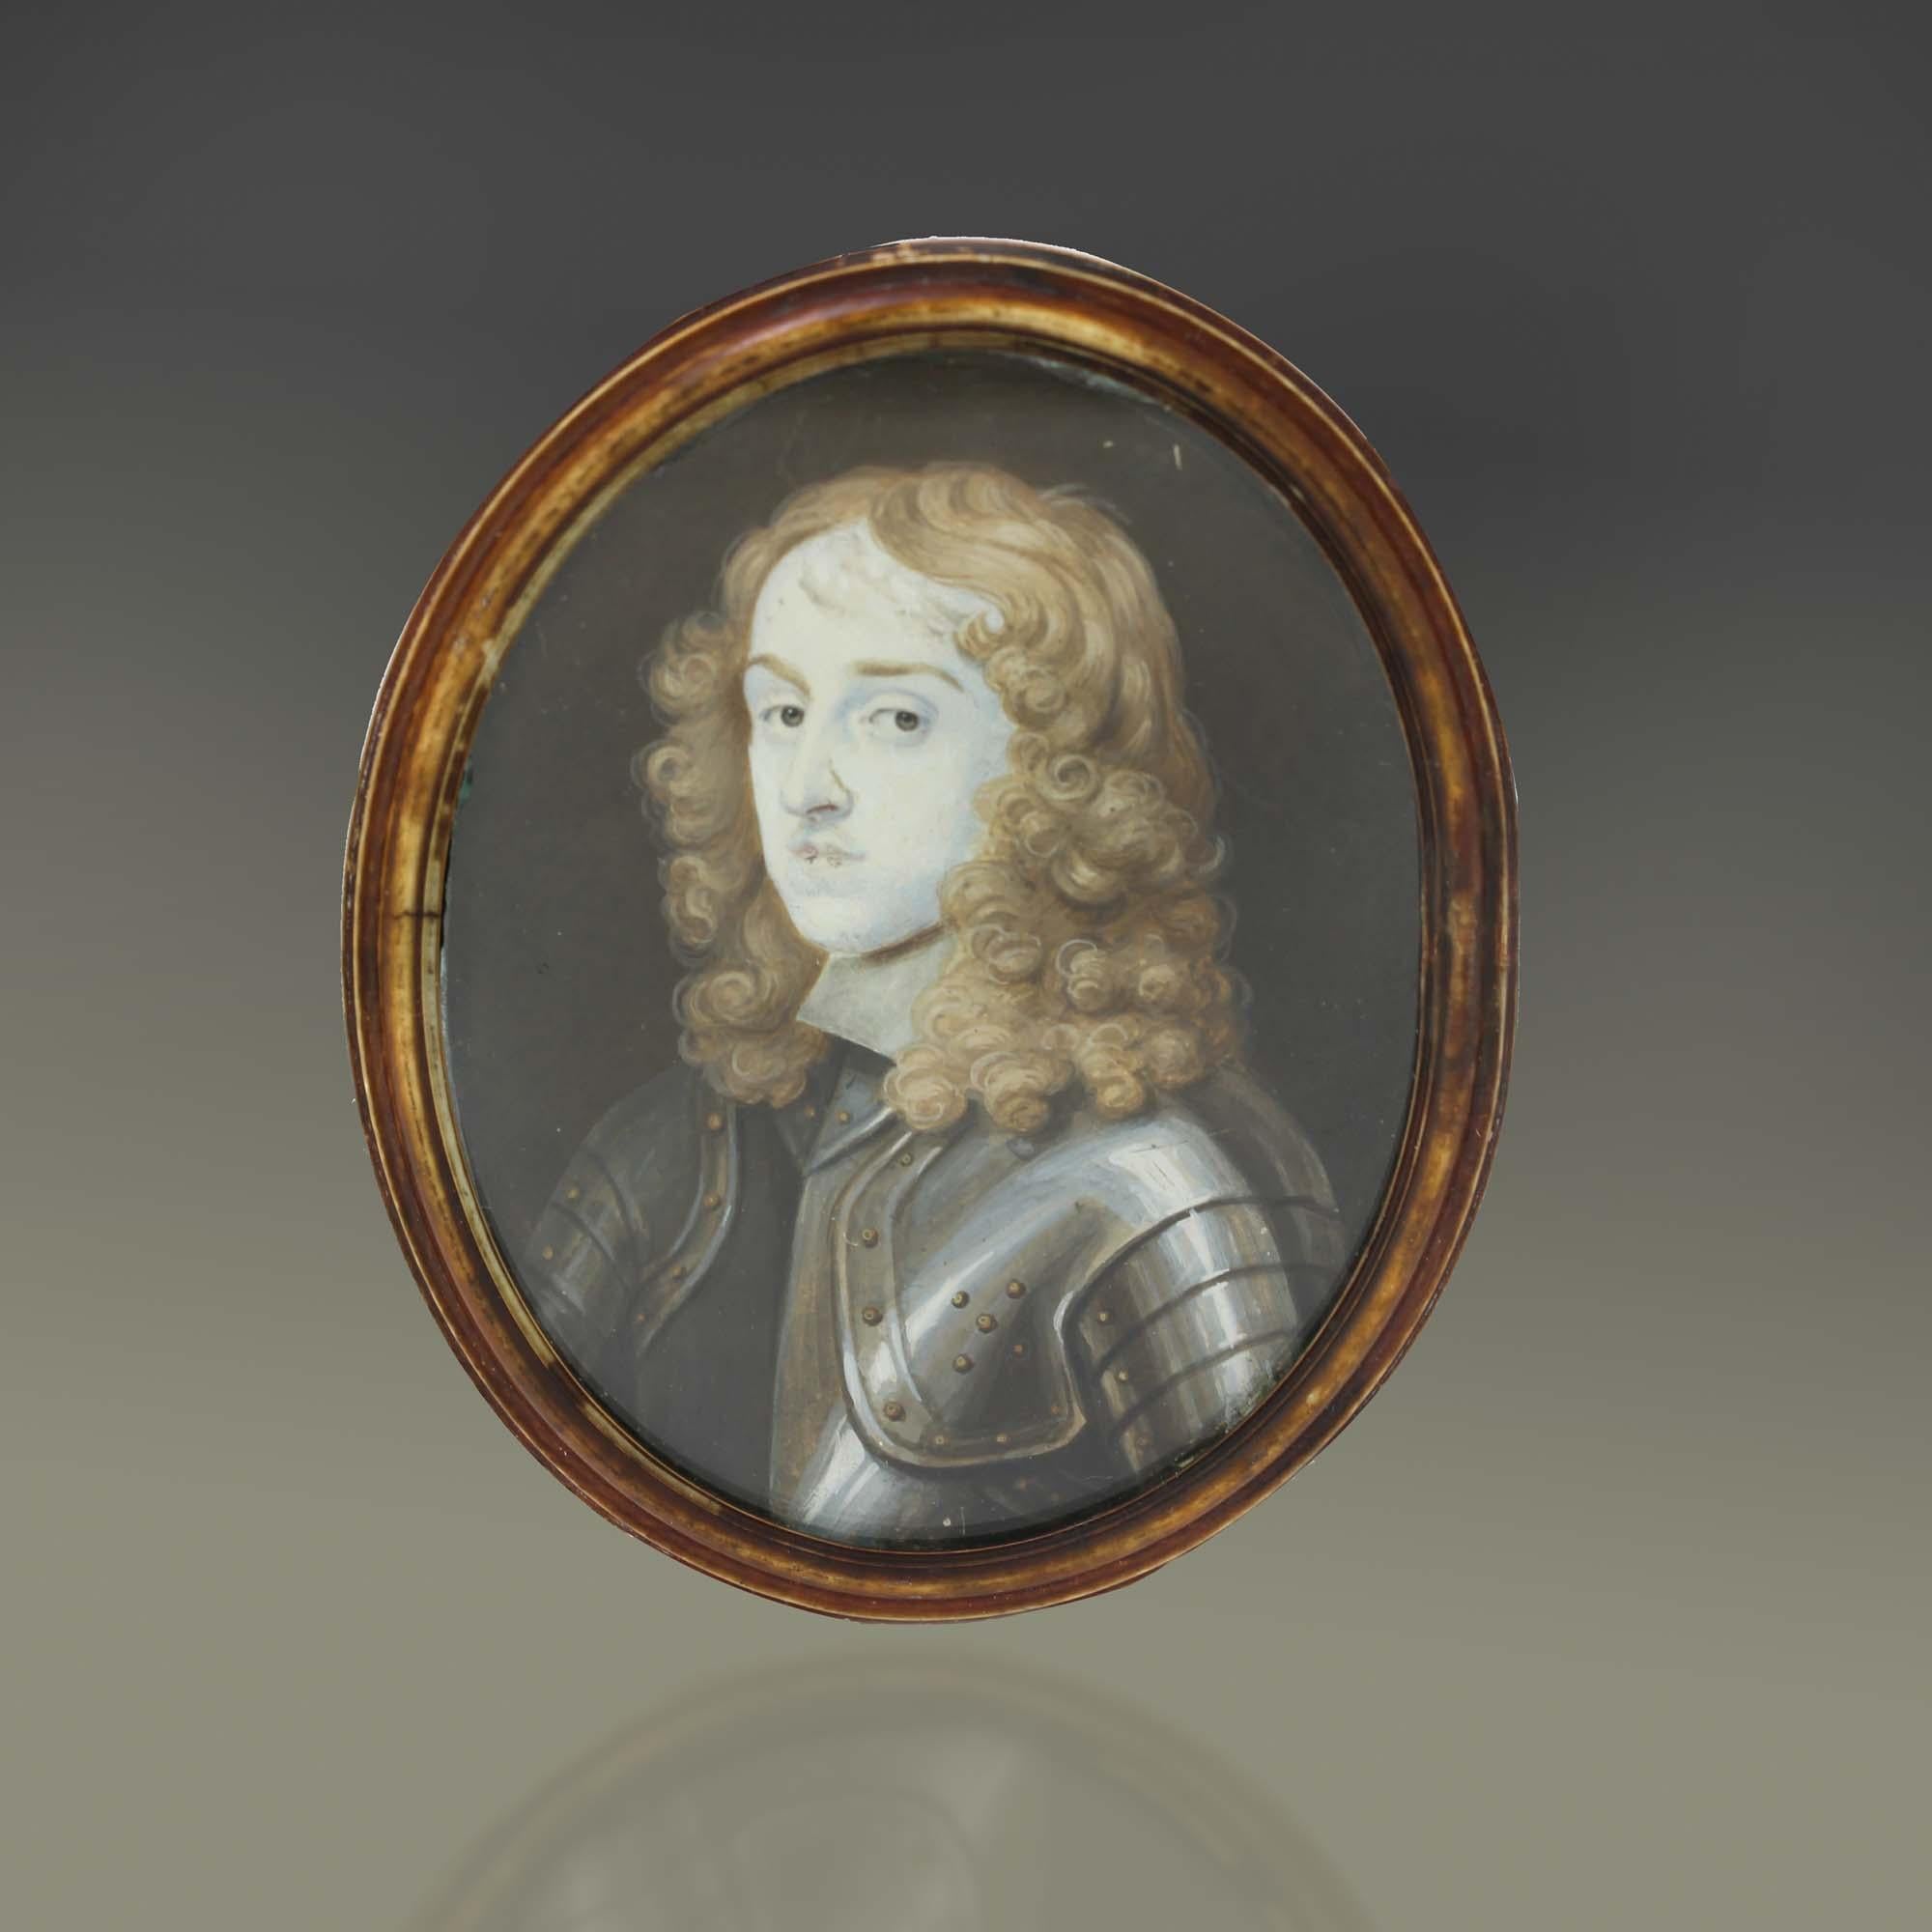 Antique portrait miniature of Thomas Osborne, 1st Duke of Leeds

Dimension:
W: 6 cm 
H: 8 cm 

In miniature is depicted Thomas Osborne, wearing a suit of armour. 
Watercolour on vellum Ca.1695. Original turned frame with Lord Danby and date,